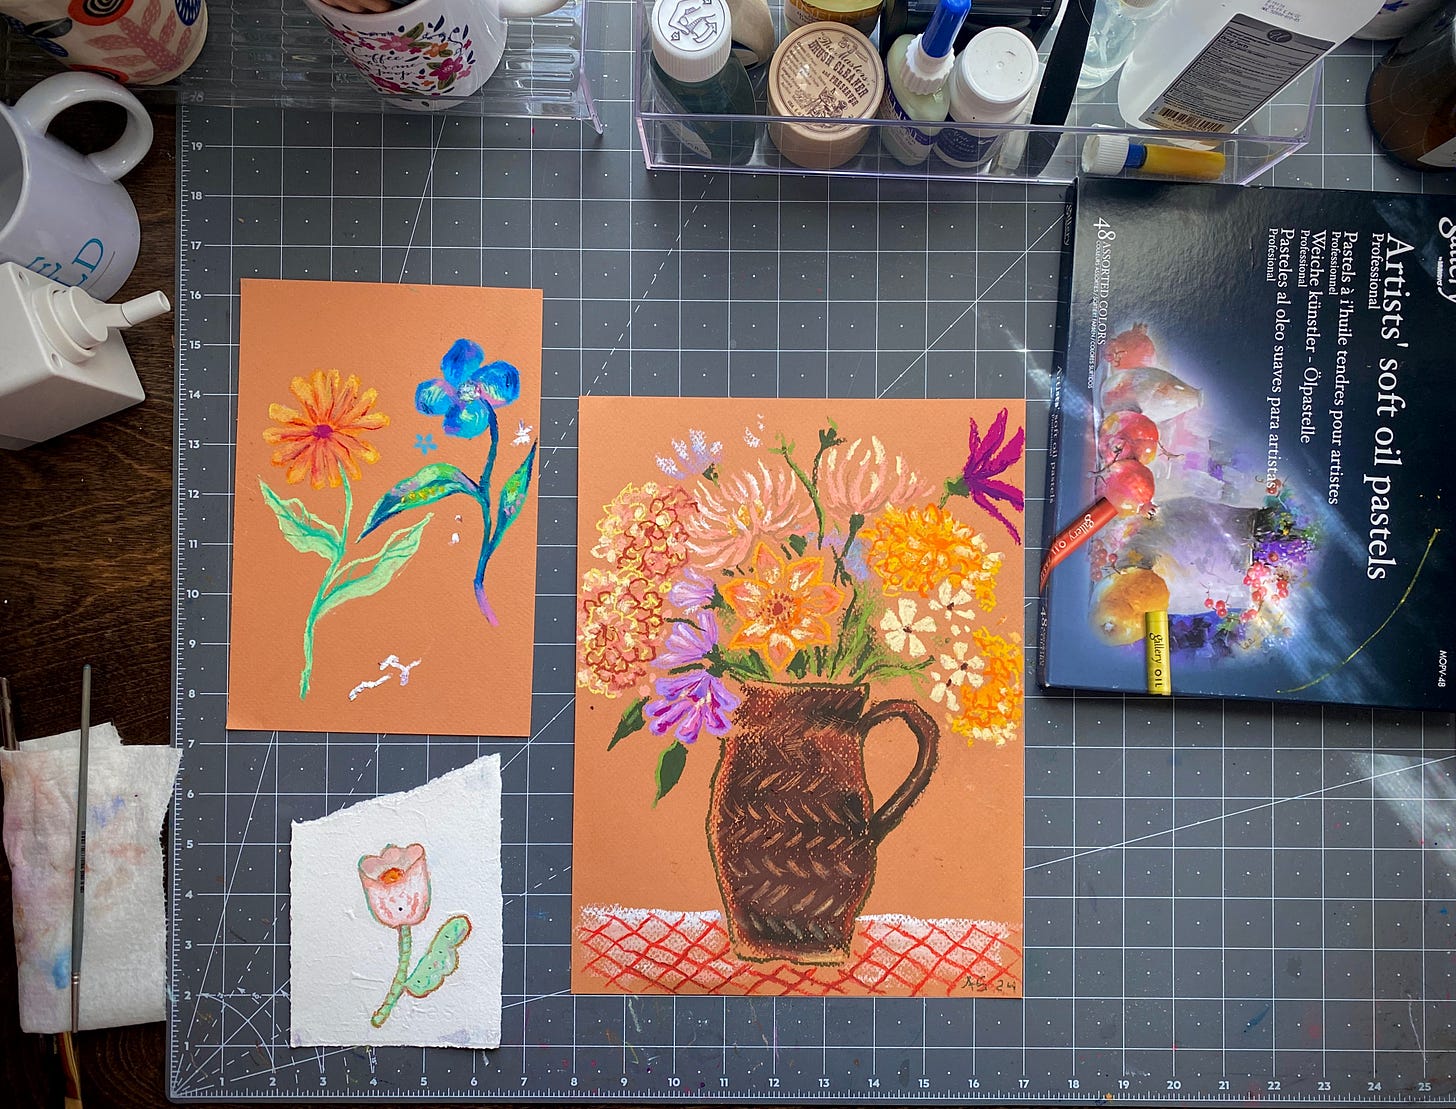 A photo of the artist's studio desk with art supplies, focusing on three different oil pastel flower still life drawings.